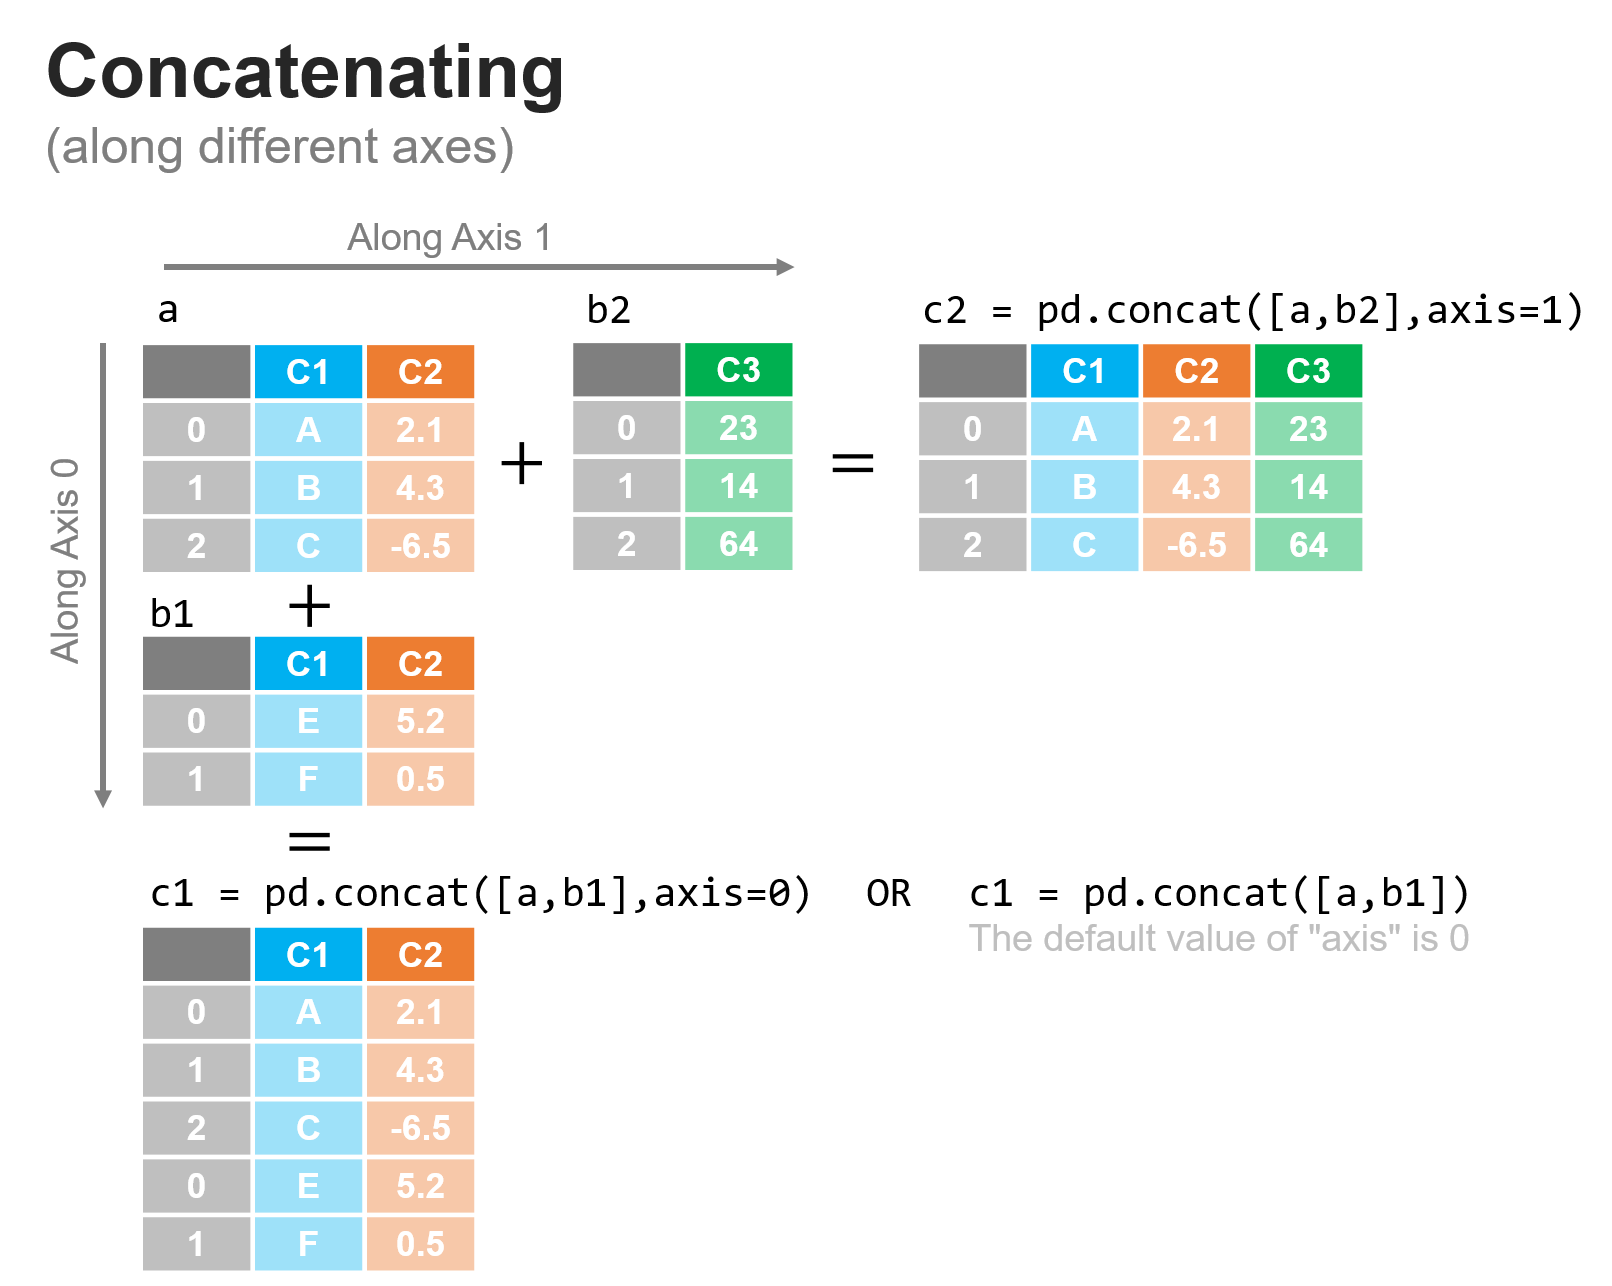 Concatenating along different axes